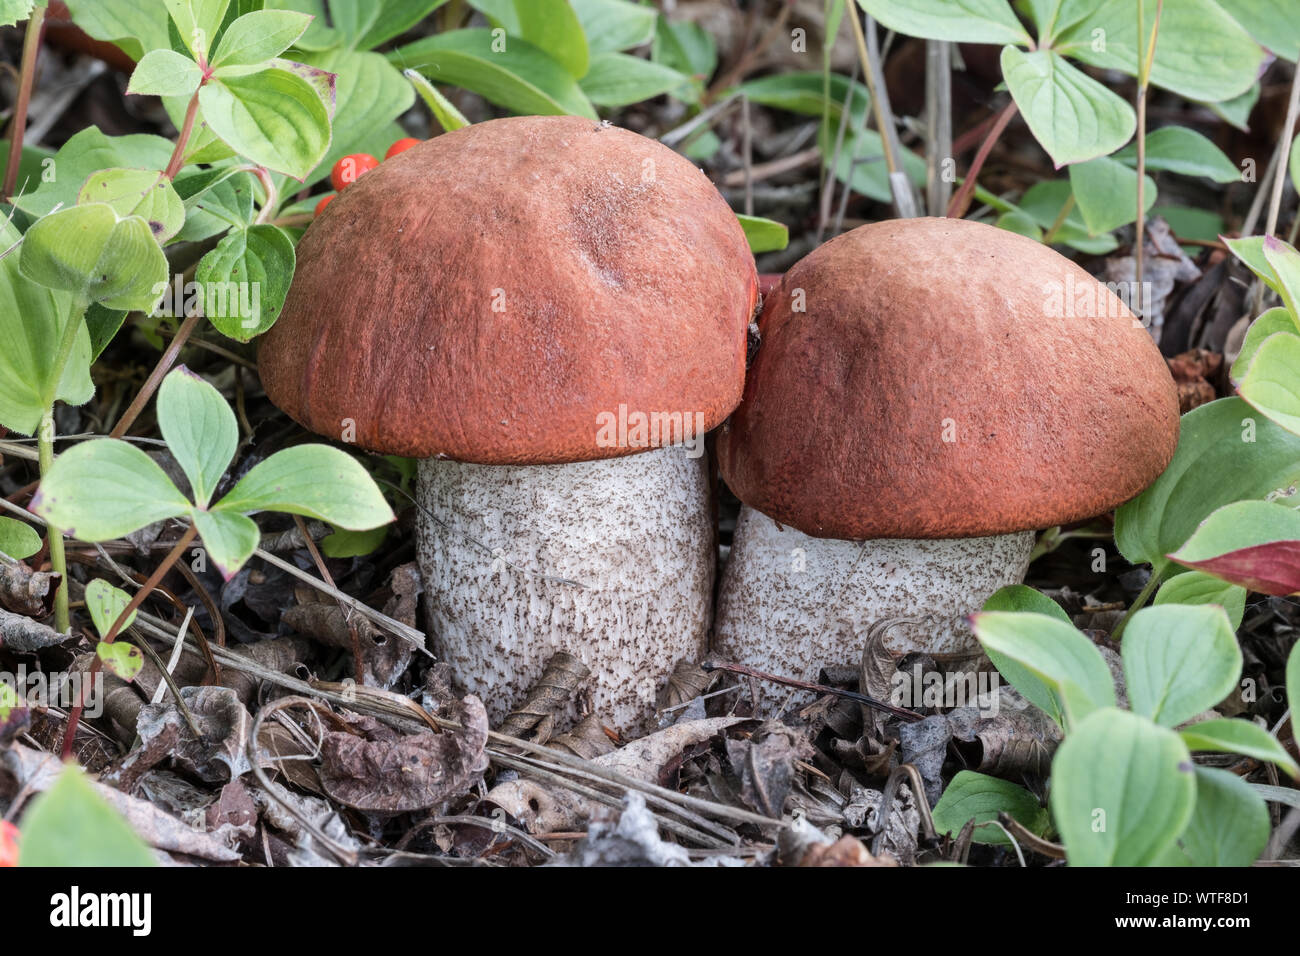 leccinum boreal mushrooms. These are a common edible mushroom found in the boreal forest of North America. Stock Photo